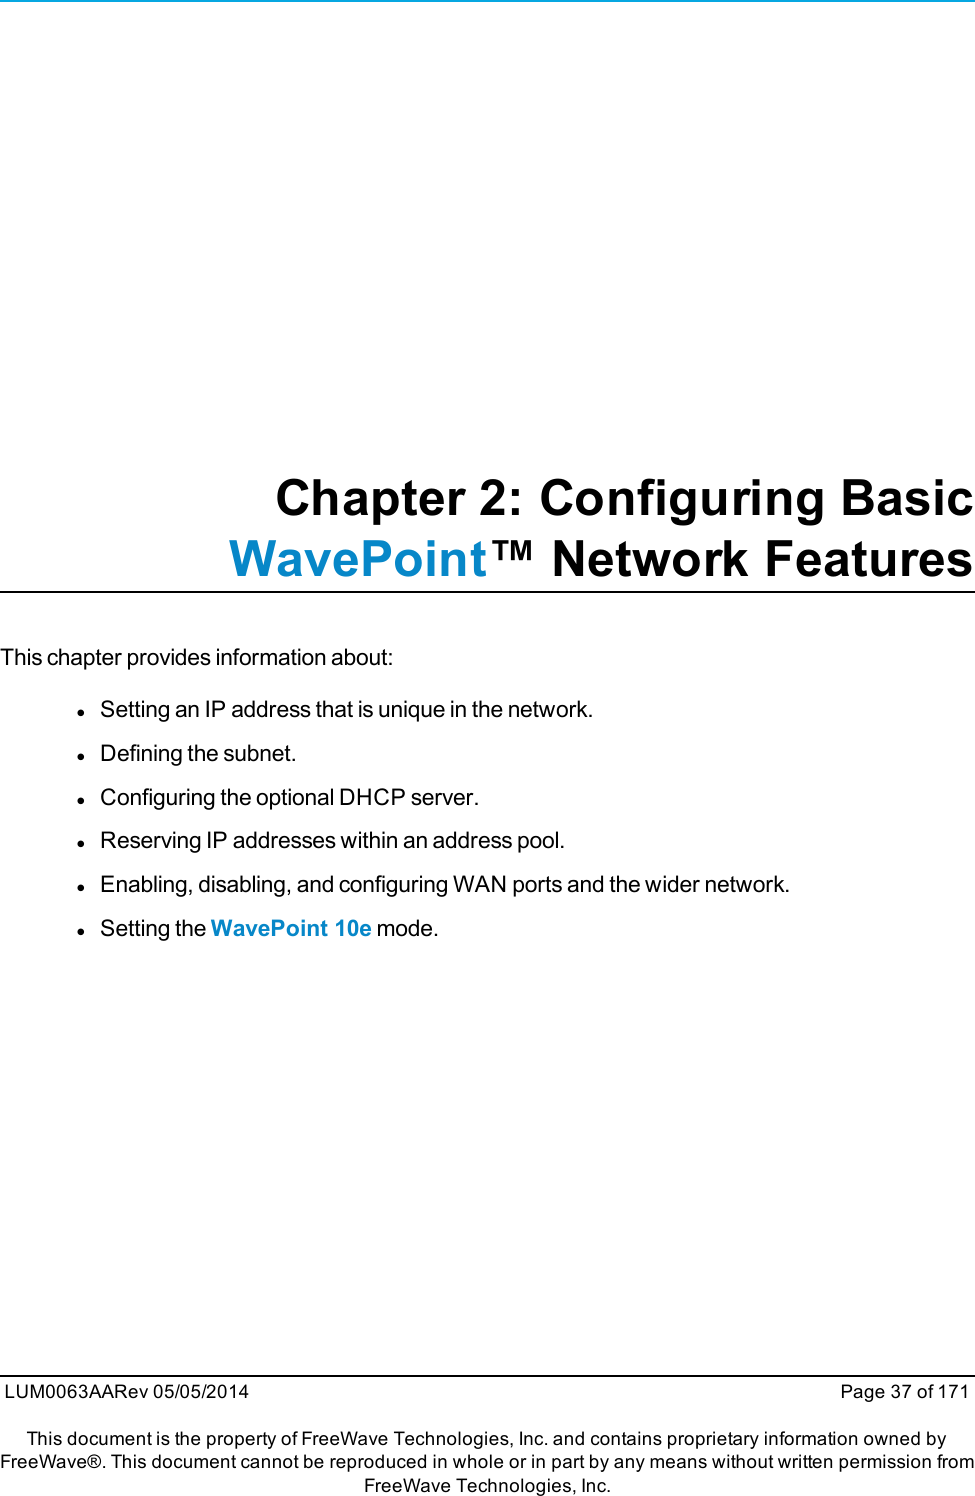 Chapter 2: Configuring BasicWavePoint™ Network FeaturesThis chapter provides information about:lSetting an IP address that is unique in the network.lDefining the subnet.lConfiguring the optional DHCP server.lReserving IP addresses within an address pool.lEnabling, disabling, and configuring WAN ports and the wider network.lSetting the WavePoint 10e mode.LUM0063AARev 05/05/2014 Page 37 of 171This document is the property of FreeWave Technologies, Inc. and contains proprietary information owned byFreeWave®. This document cannot be reproduced in whole or in part by any means without written permission fromFreeWave Technologies, Inc.